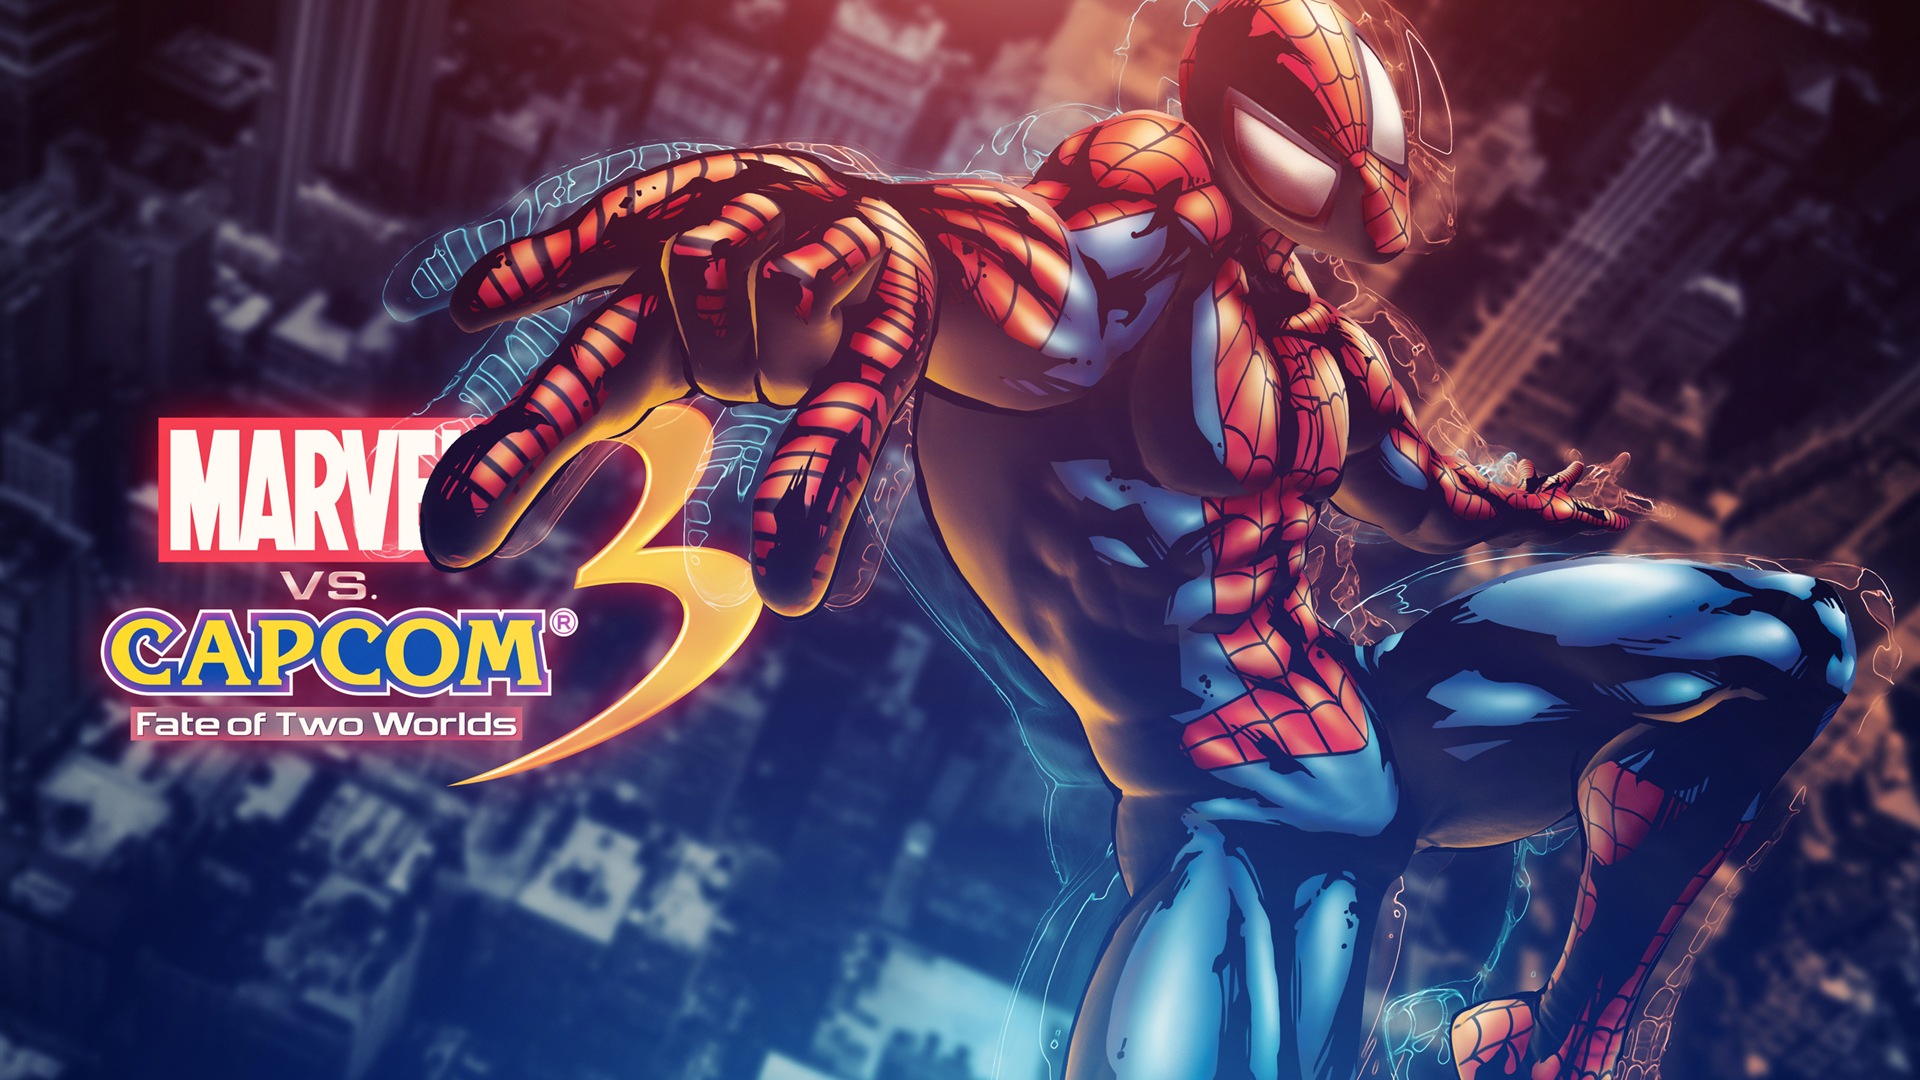 Marvel VS. Capcom 3: Fate of Two Worlds HD game wallpapers #12 - 1920x1080